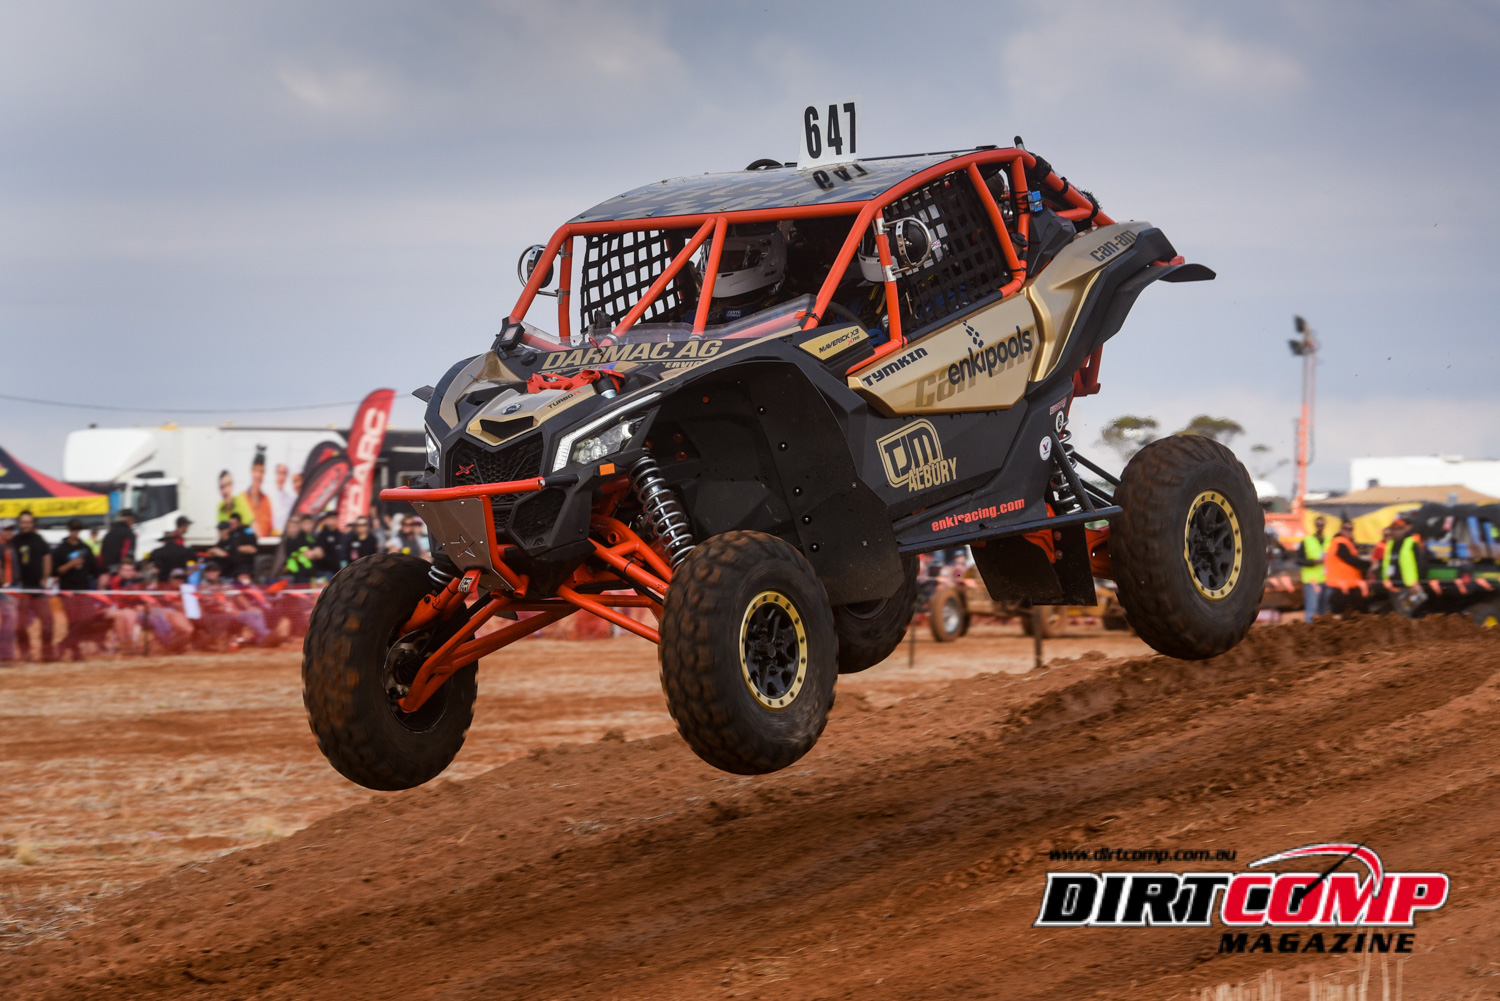 Tymken stepped on to the top of the UTV Class 6 podium at Sunraysia